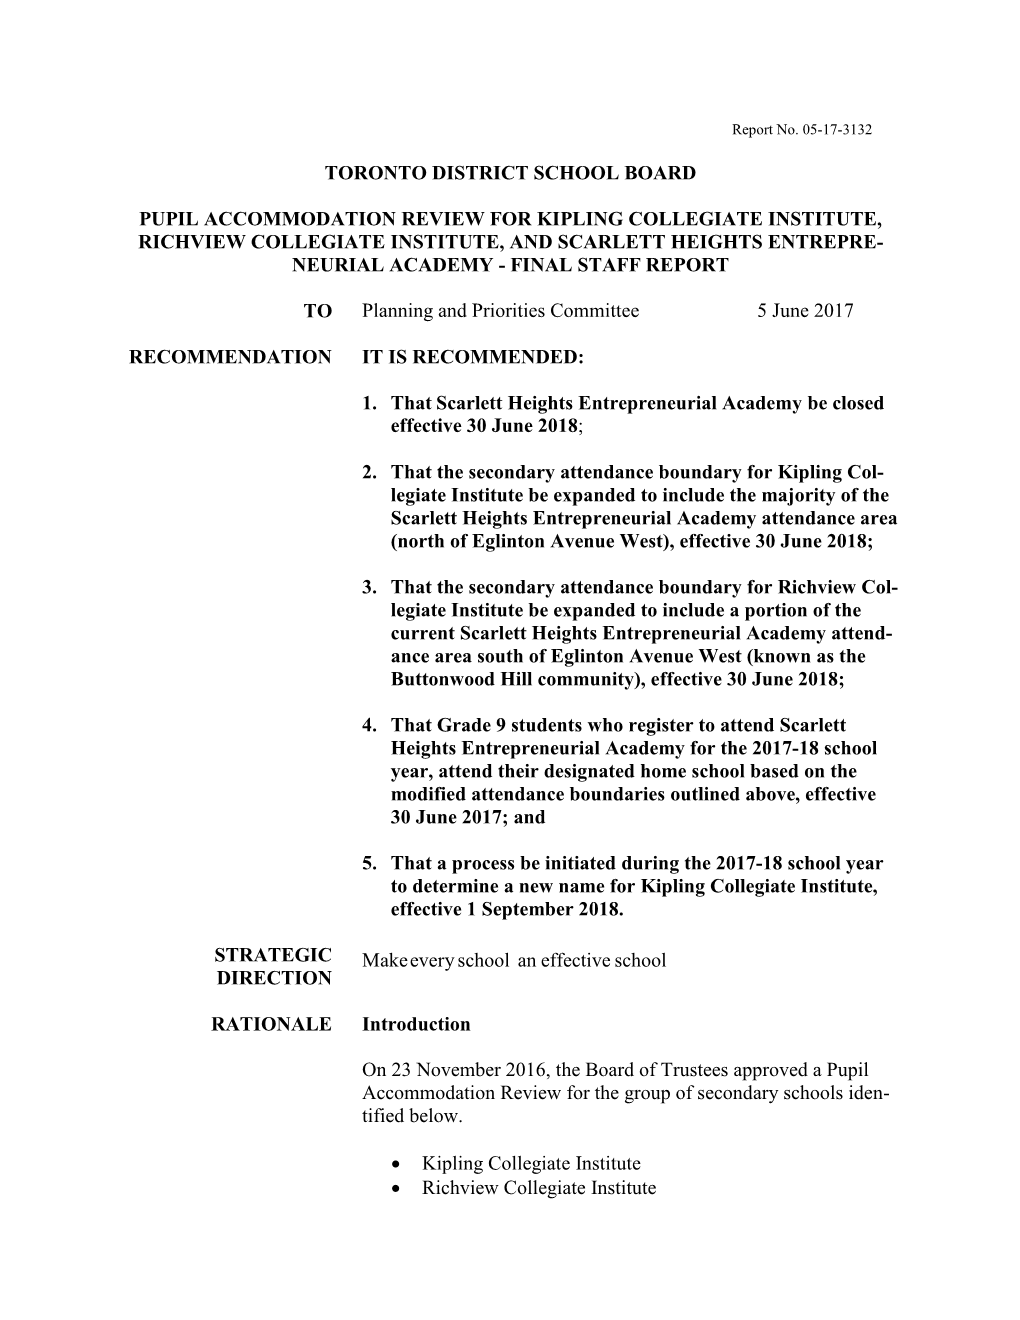 Form 583A: Staff Reports with Recommendations